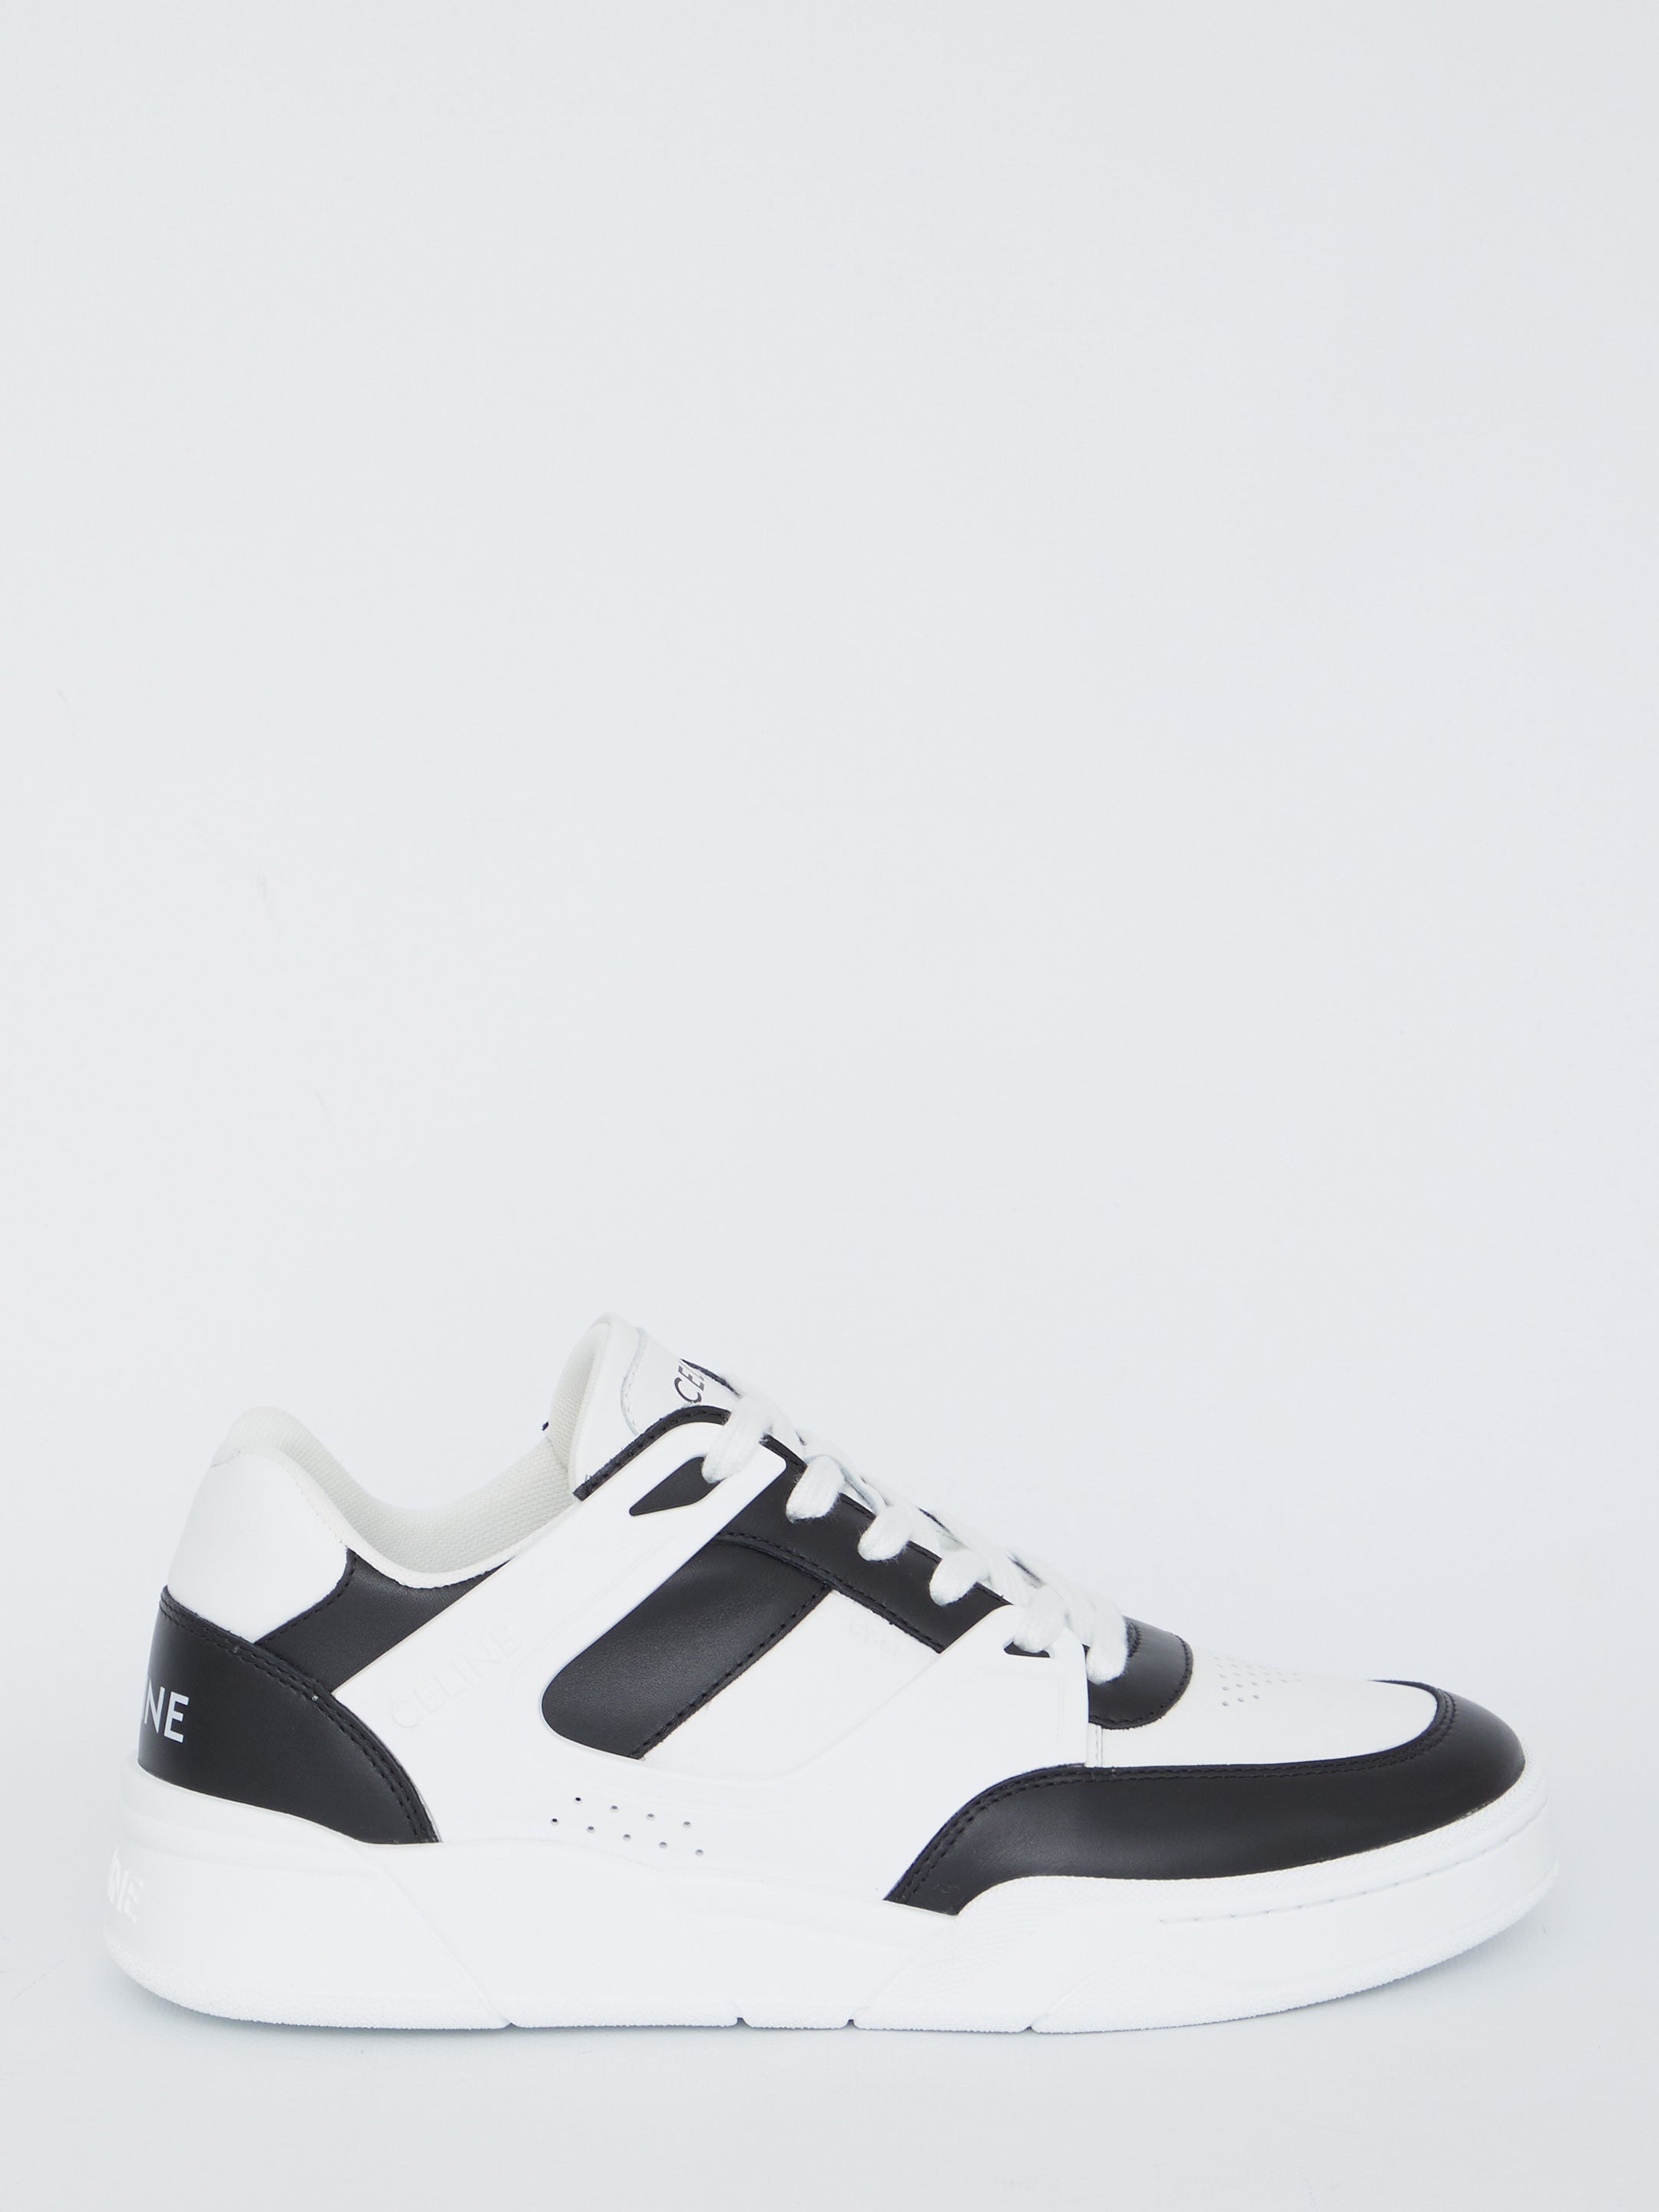 CELINE-OUTLET-SALE-CT-07-sneakers-Sneakers-40-WHITE-ARCHIVE-COLLECTION.jpg